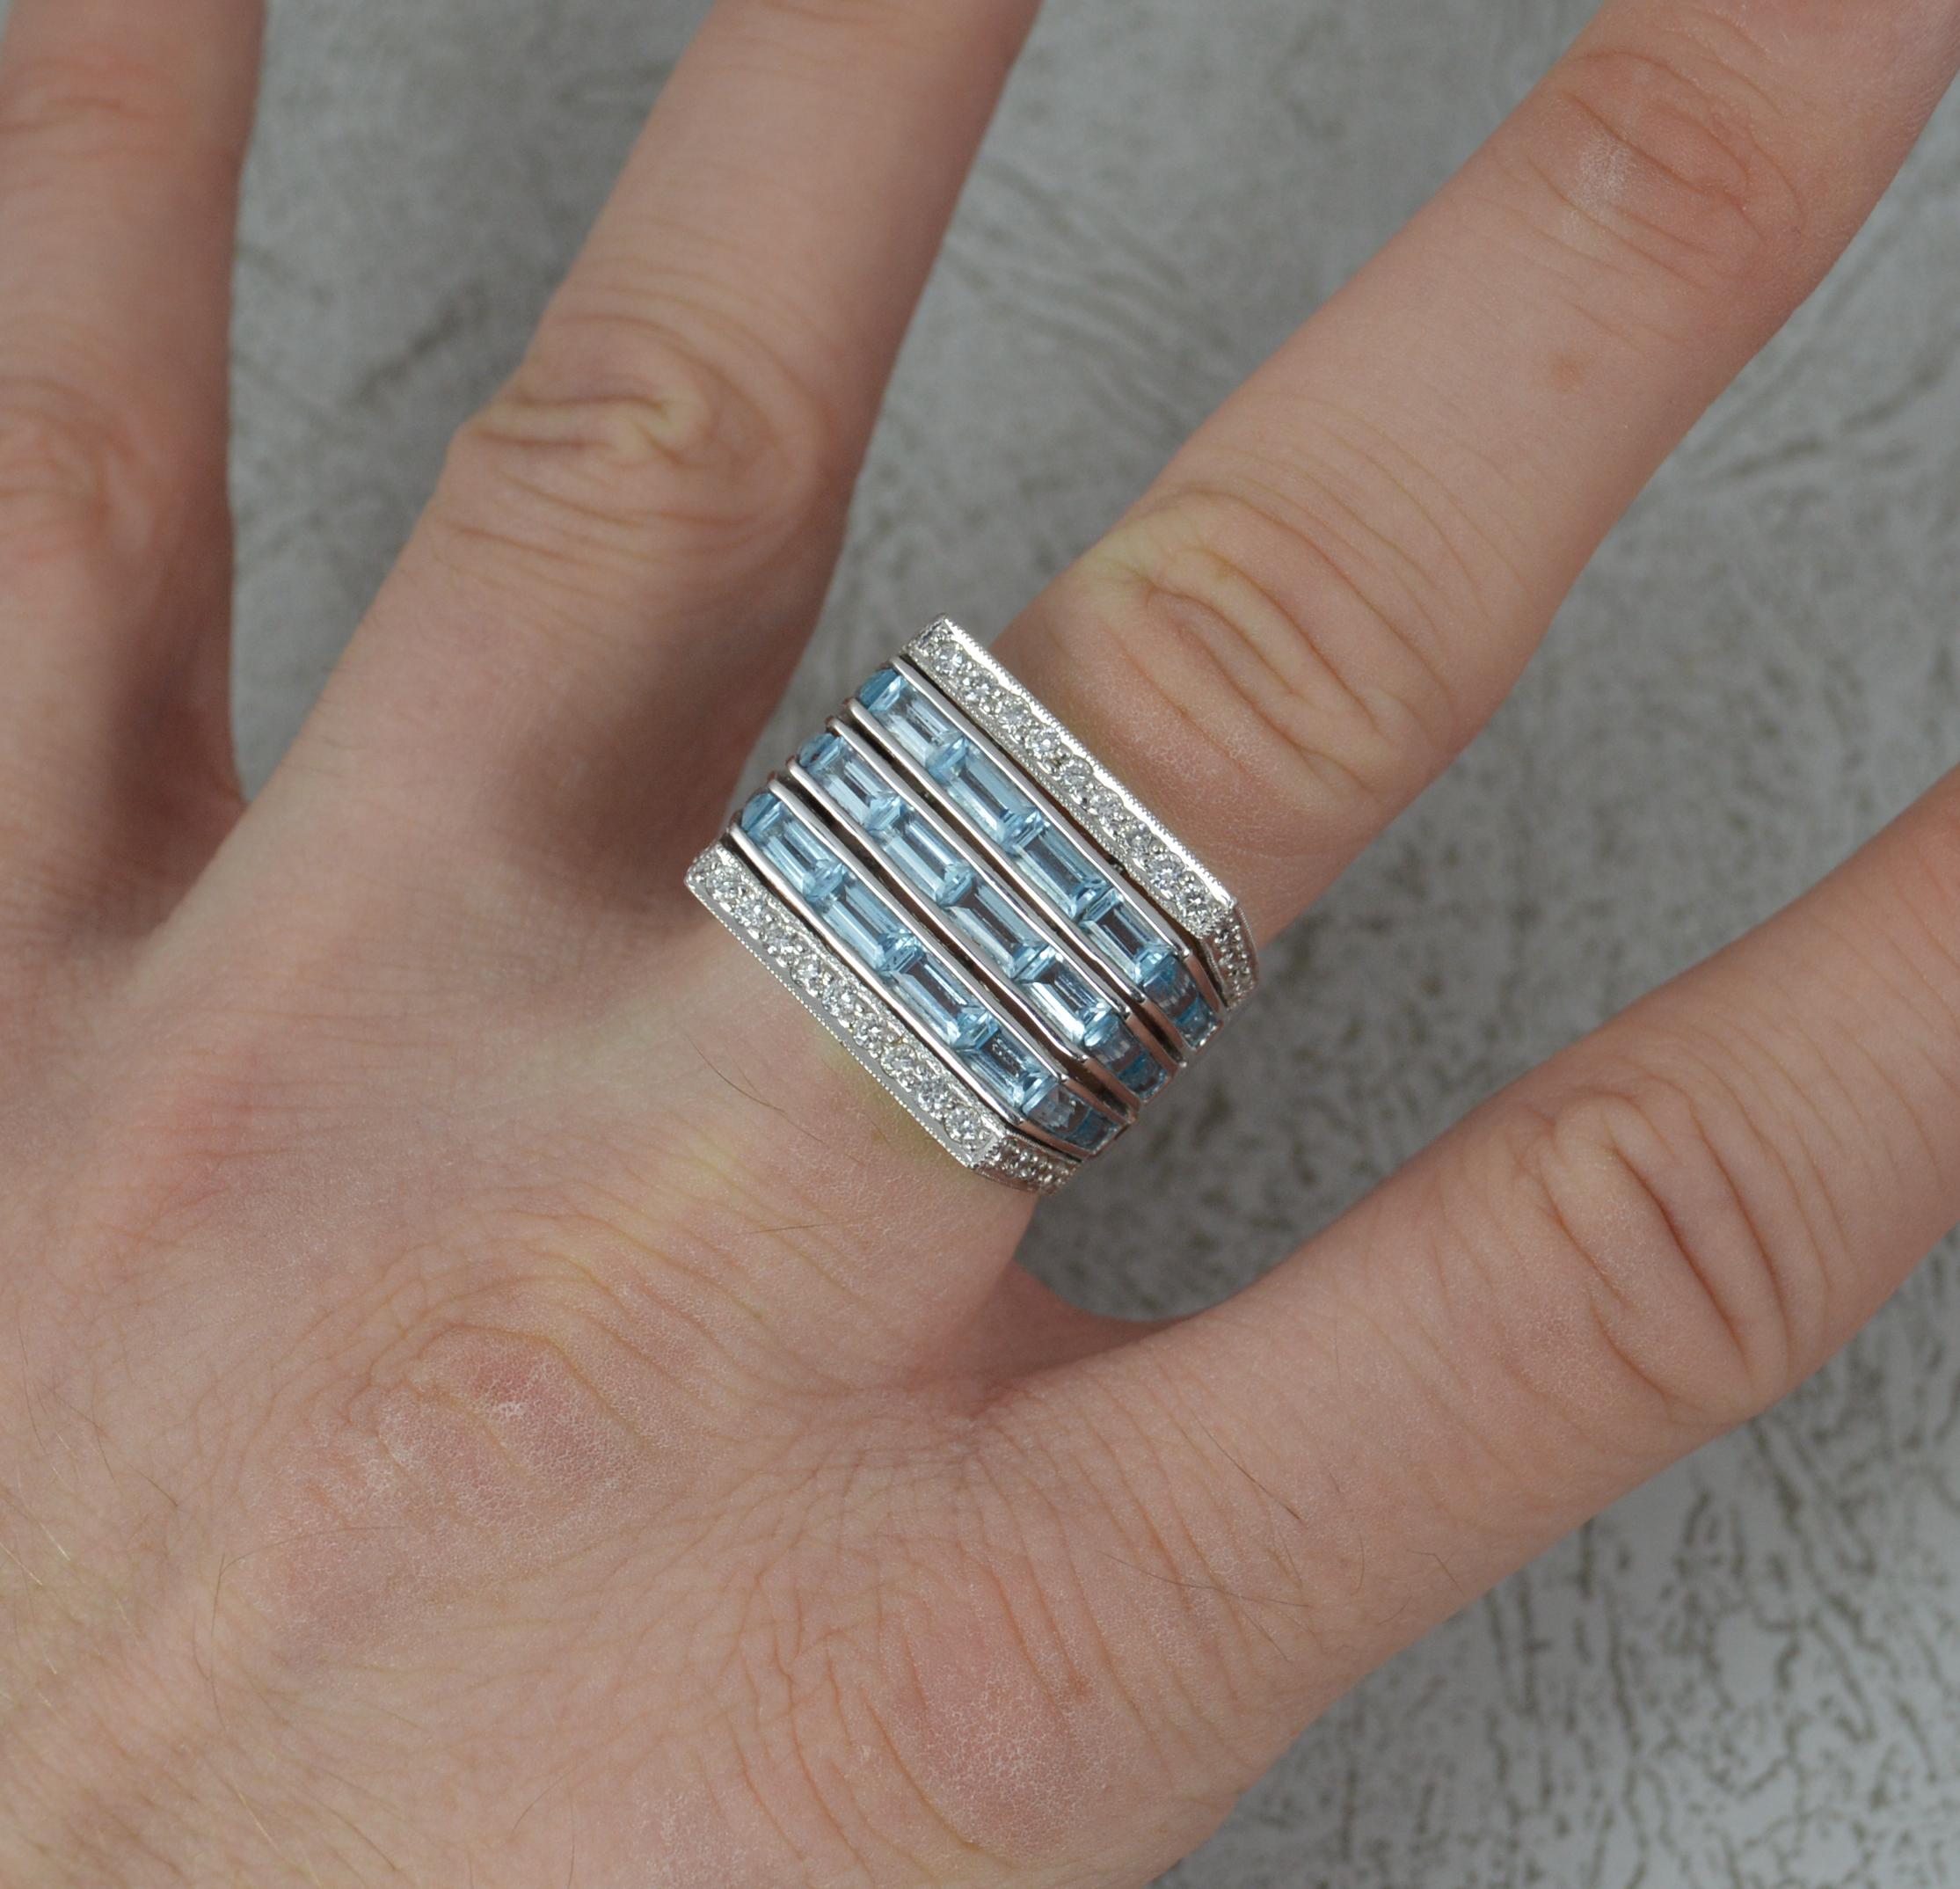 A heavy 18 carat gold, topaz and diamond ring.
Three horizontal rows of baguette cut blue topaz stones with further rows of round brilliant cut diamonds to the top and bottom. 3.64 carat of topaz and 0.52 carat of diamonds.
18mm x 16mm head.
Well